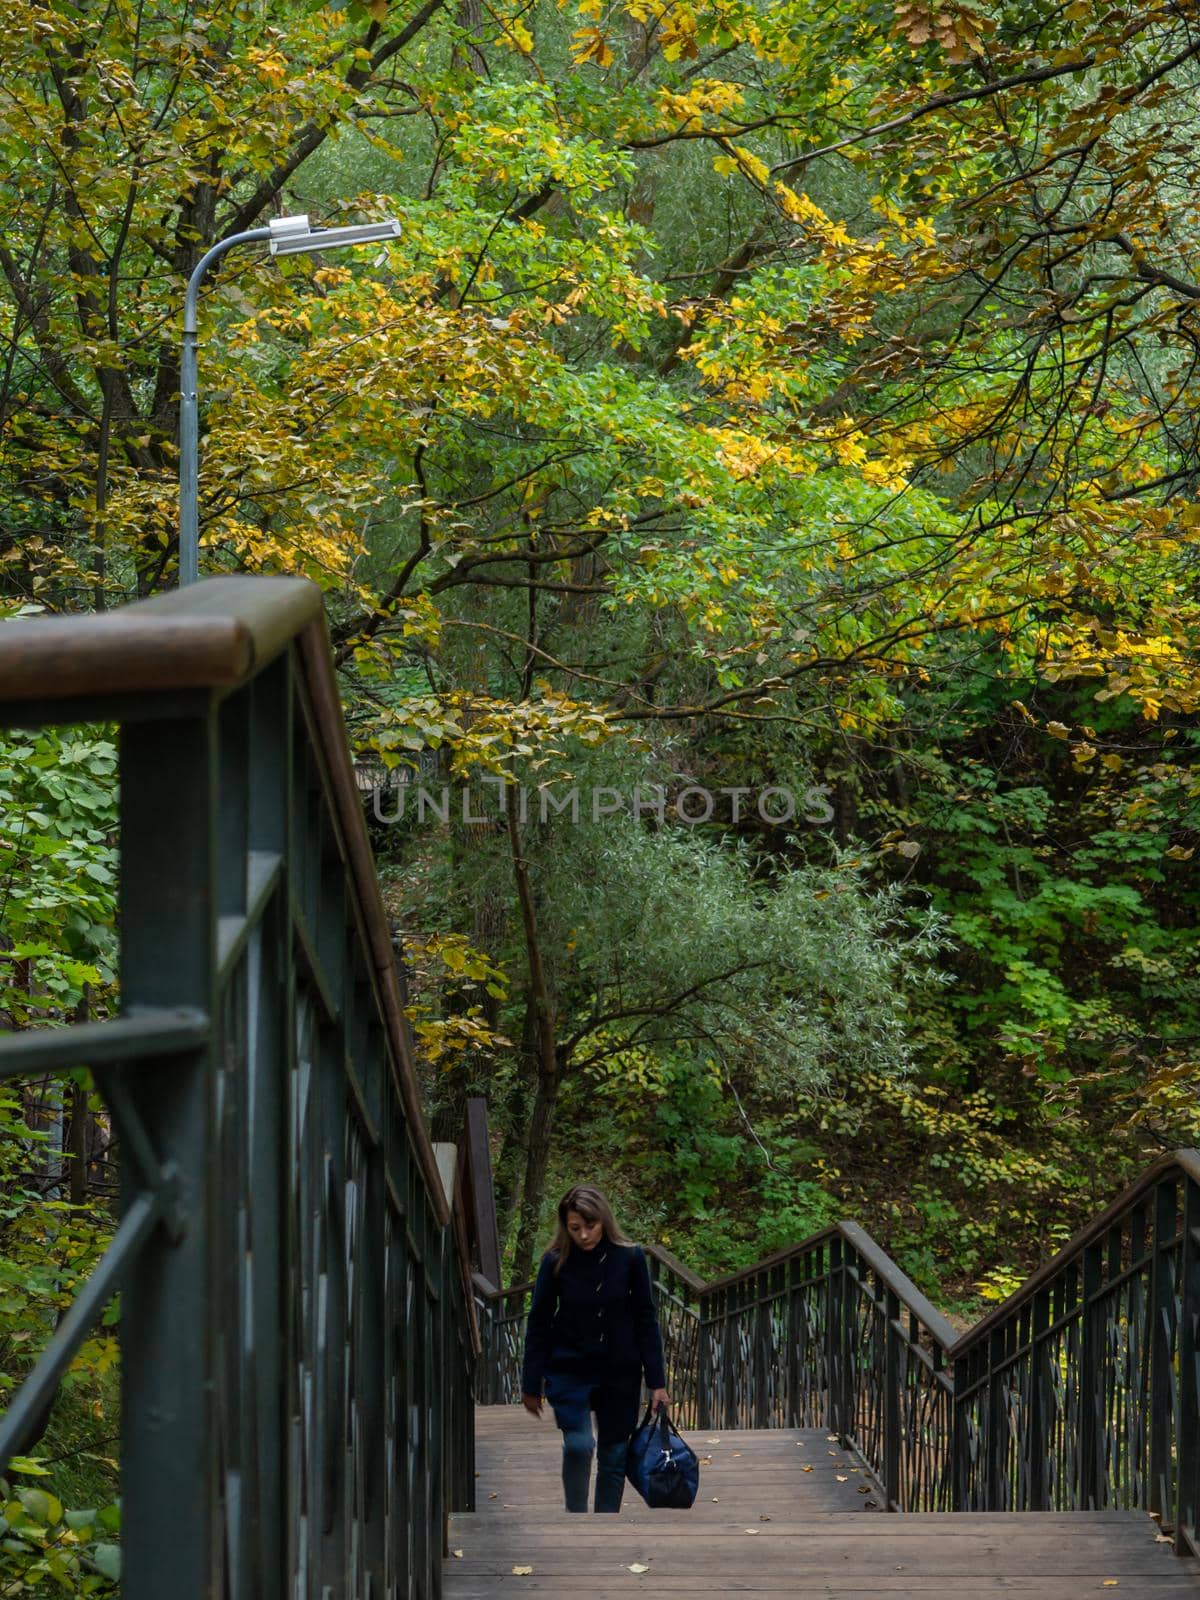 Walk across the bridge over the stream in the forest by Puludi